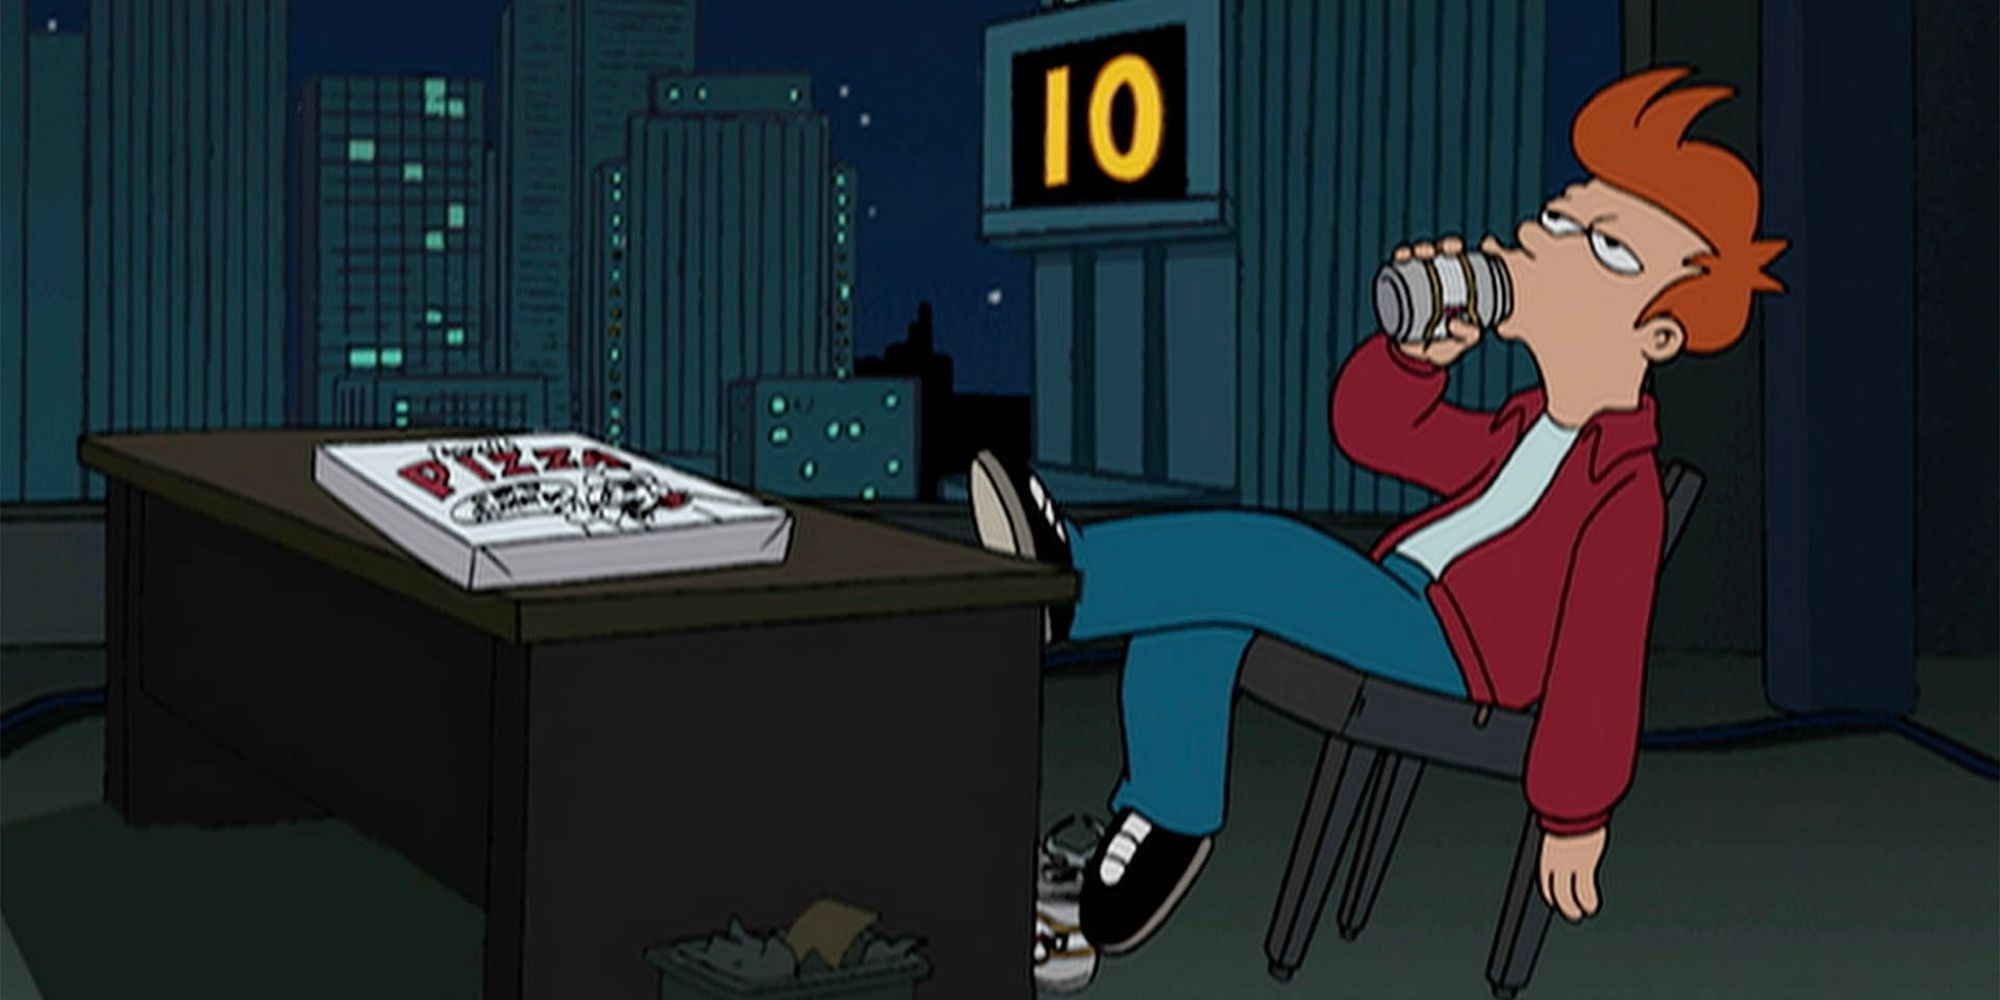 Fry from 'Futurama', sitting at a table with pizza, drinking from a can